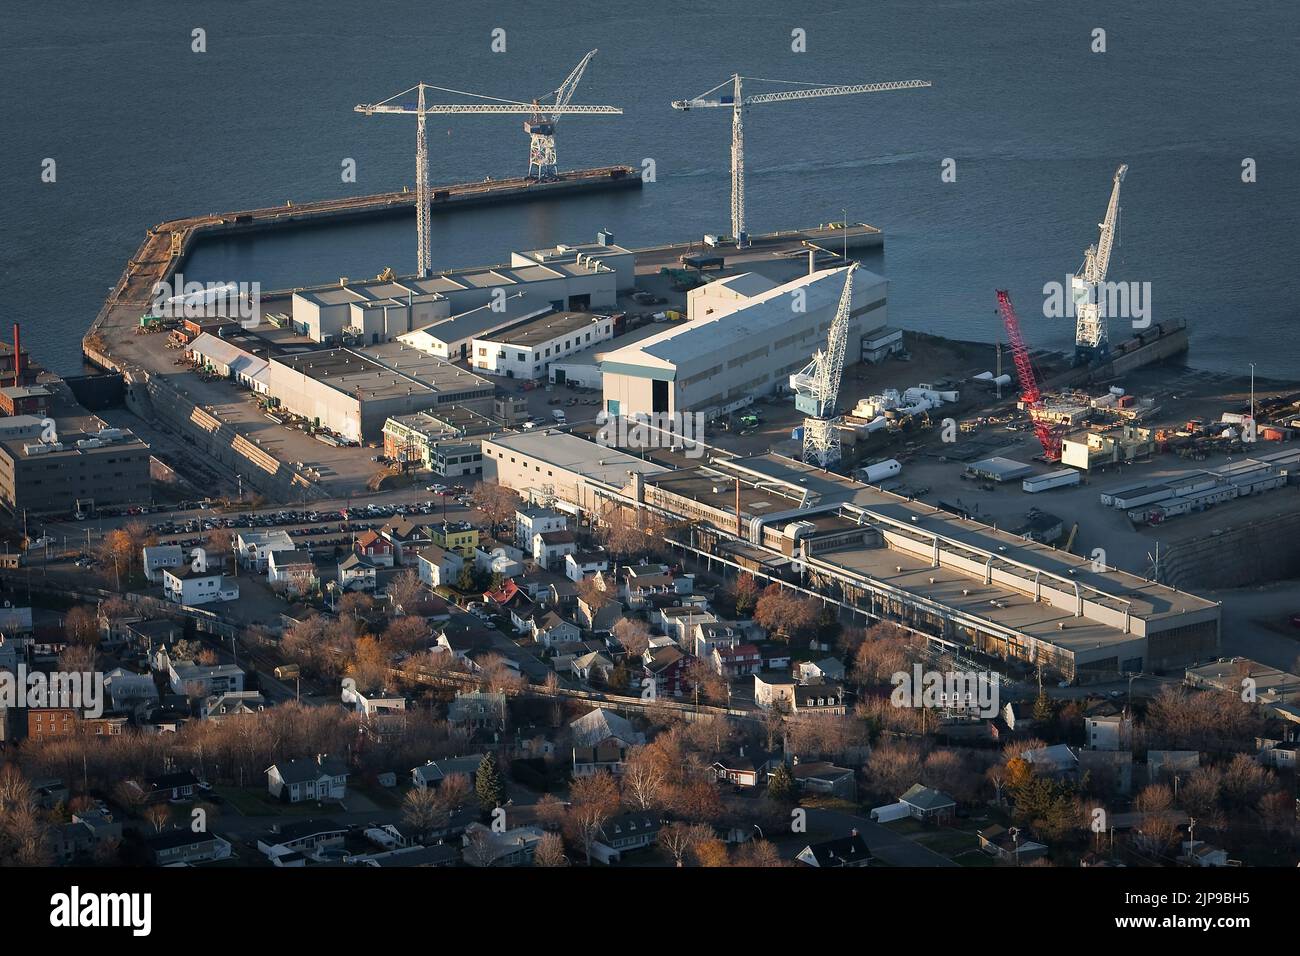 The MIL-Davie Shipbuilding in Levis, is pictured in this aerial photo November 11, 2009. The Quebec facility, located on the St. Lawrence River across from Quebec City, was closed in 1997 and declared bankruptcy in the early 2000, but have been re-activated for a contract to be delivered in 2009. Stock Photo